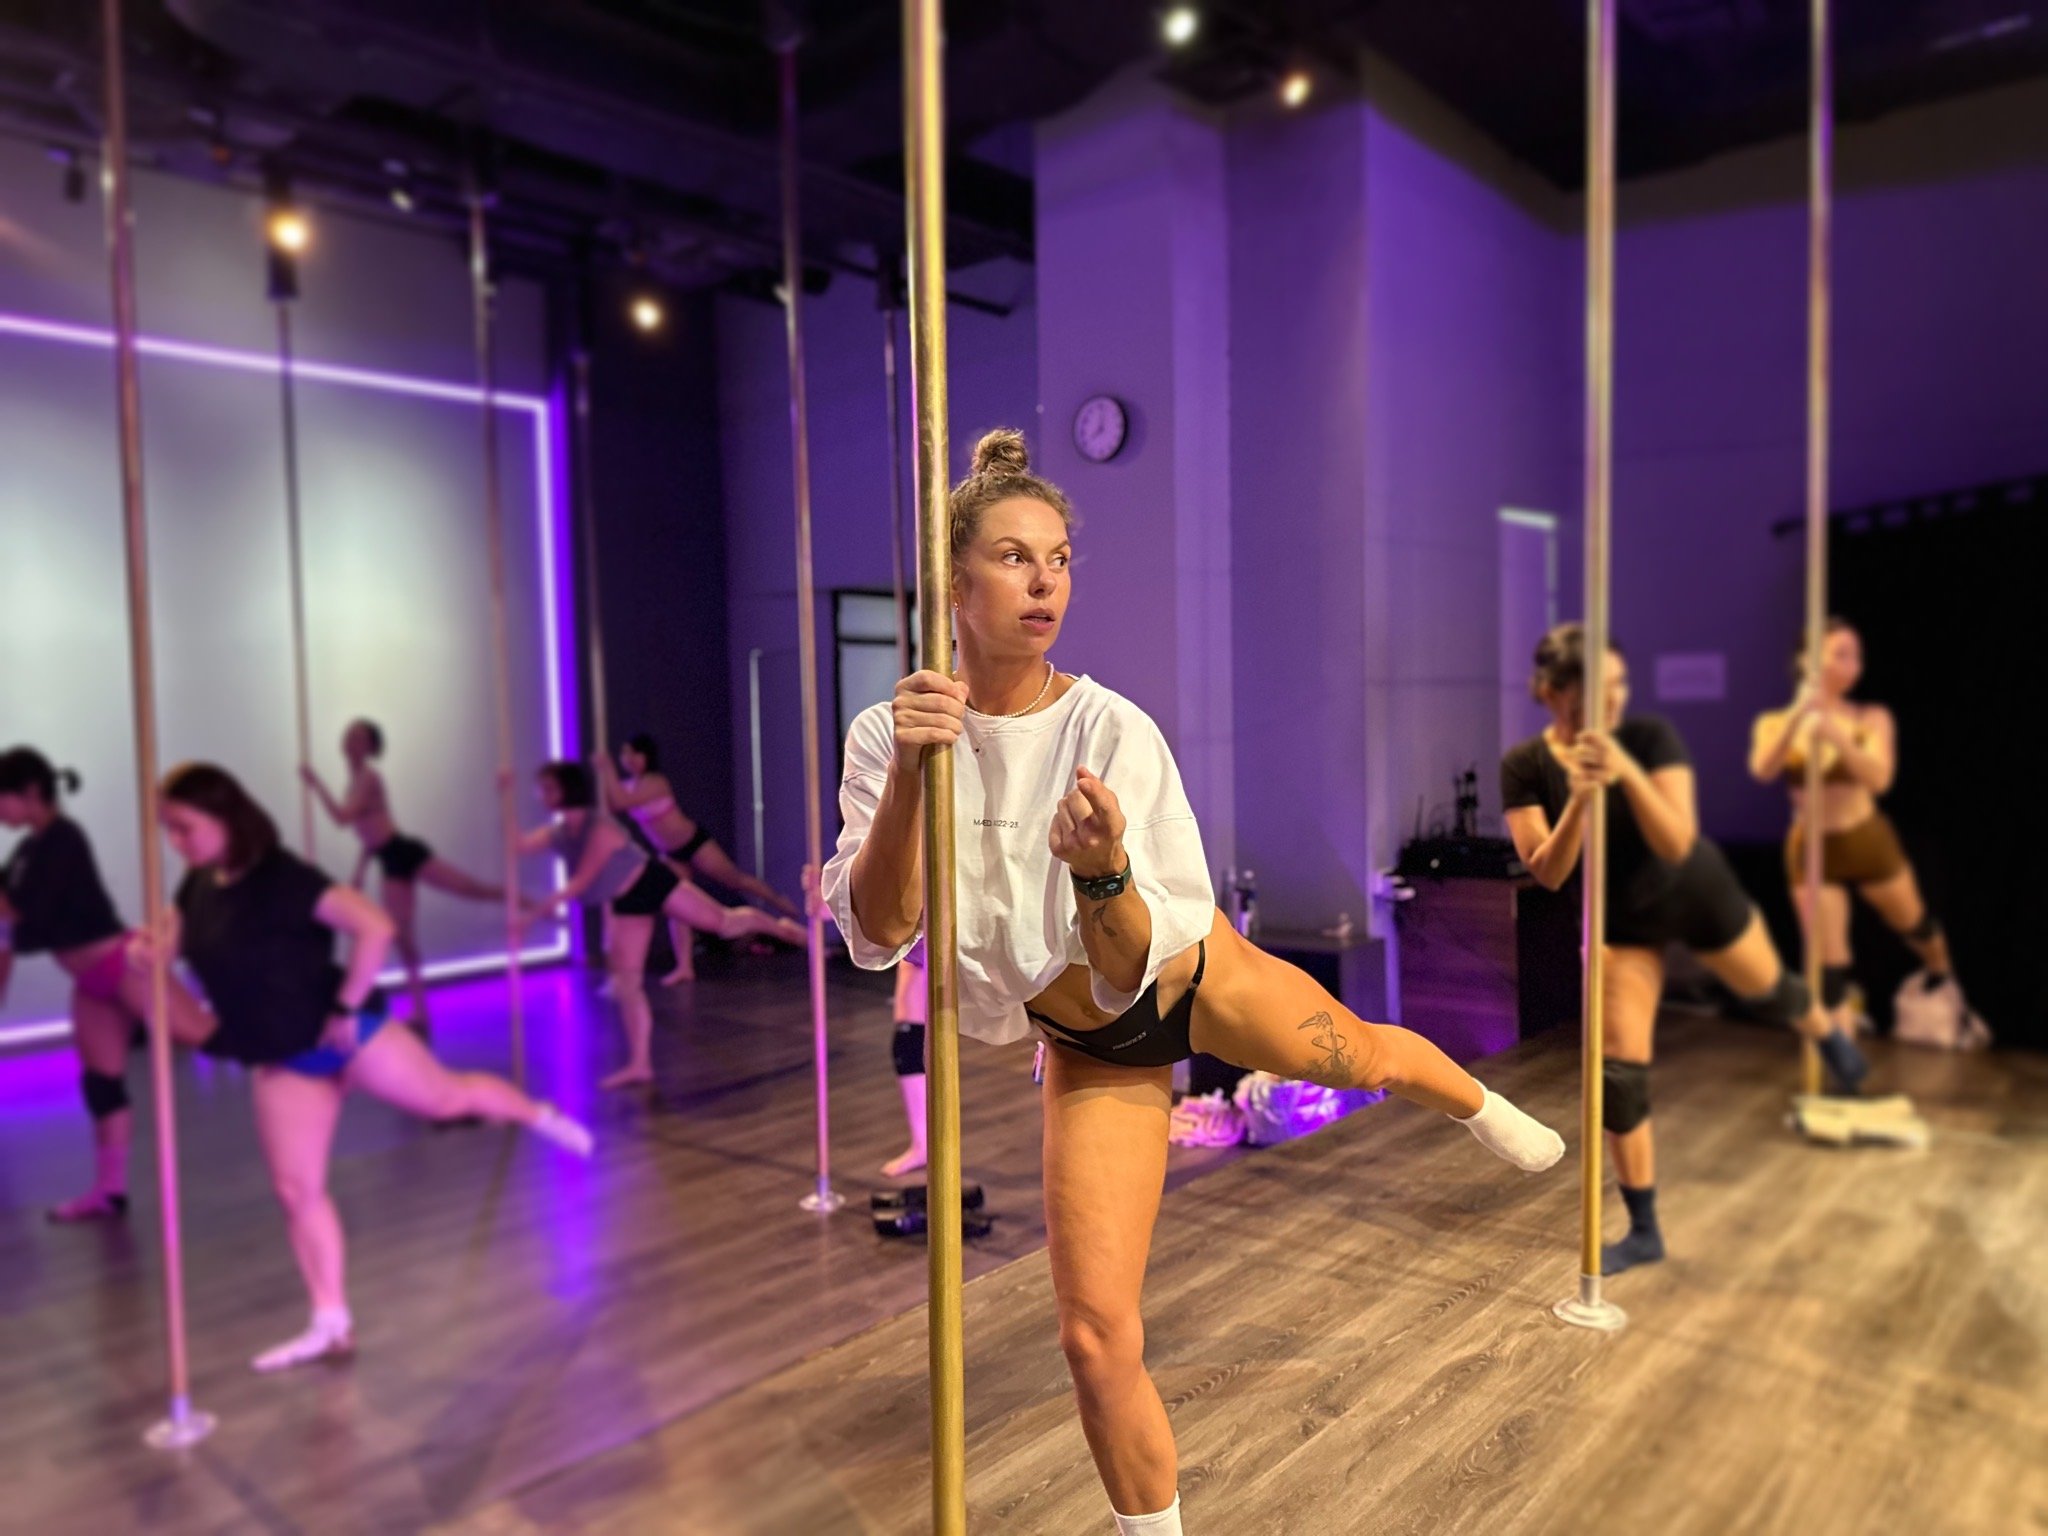 The Brass Barre - POLE SASS & A$$ Learn to wiggle and